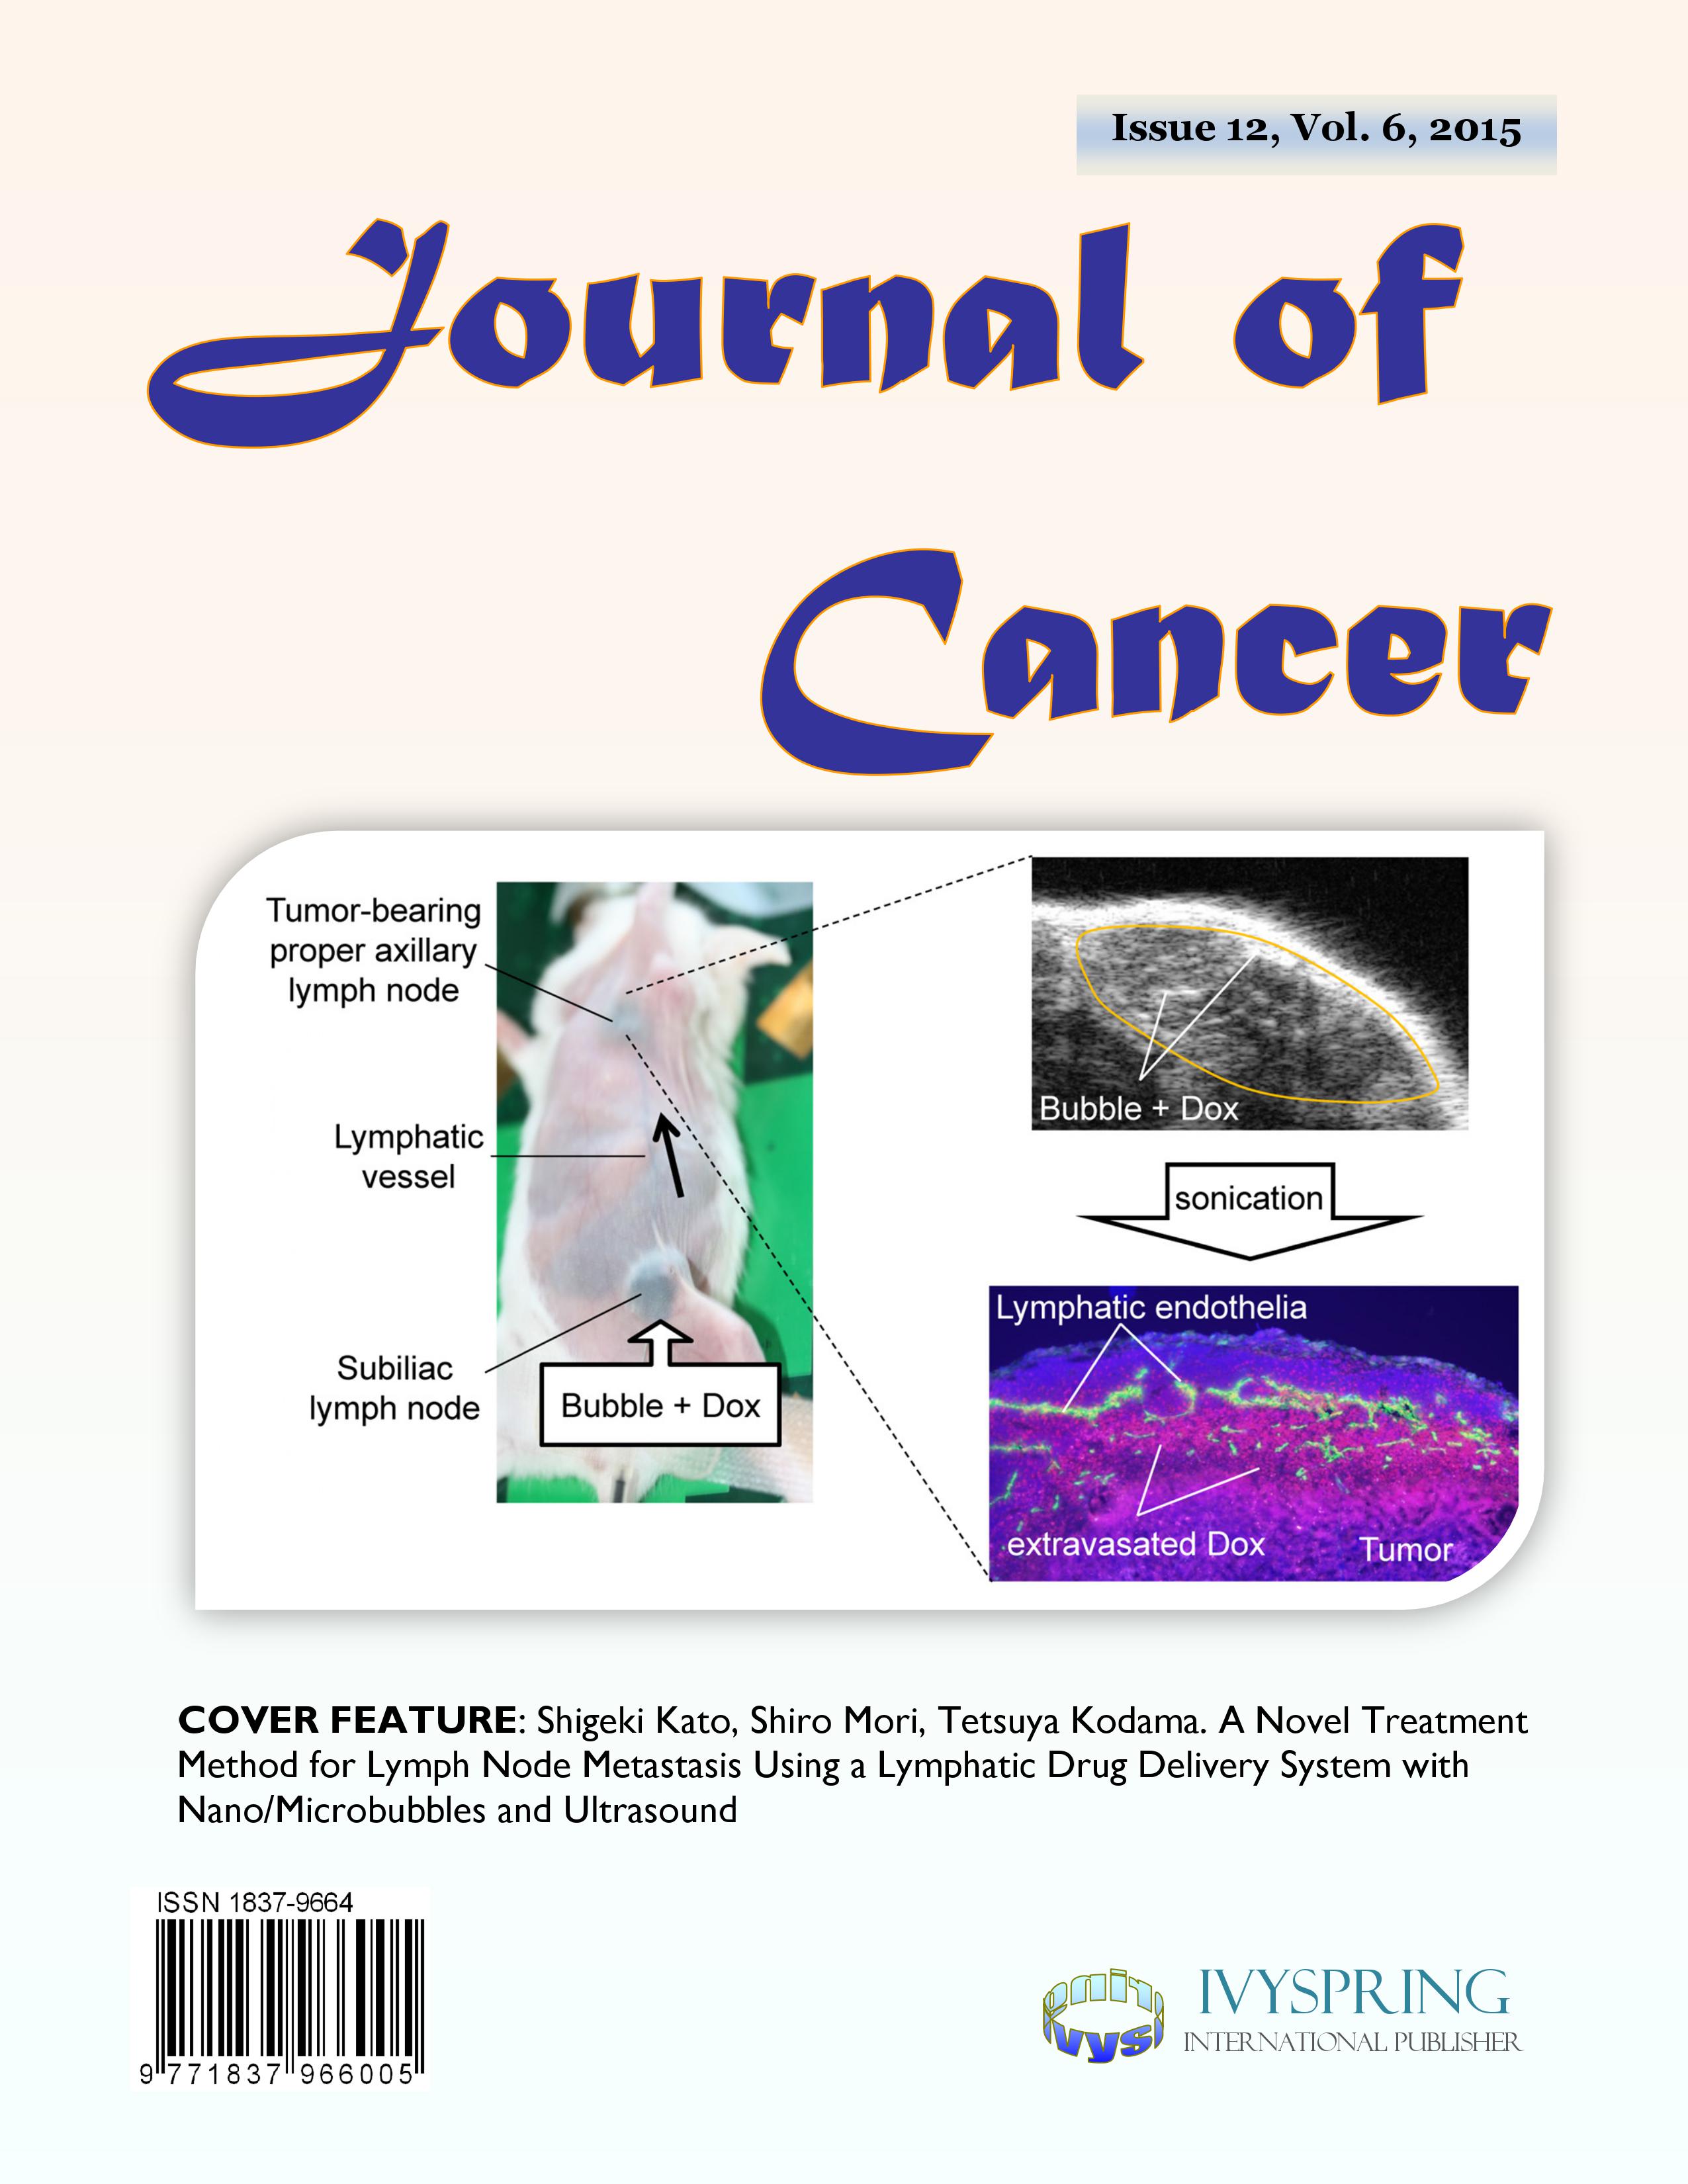 Journal of cancer 